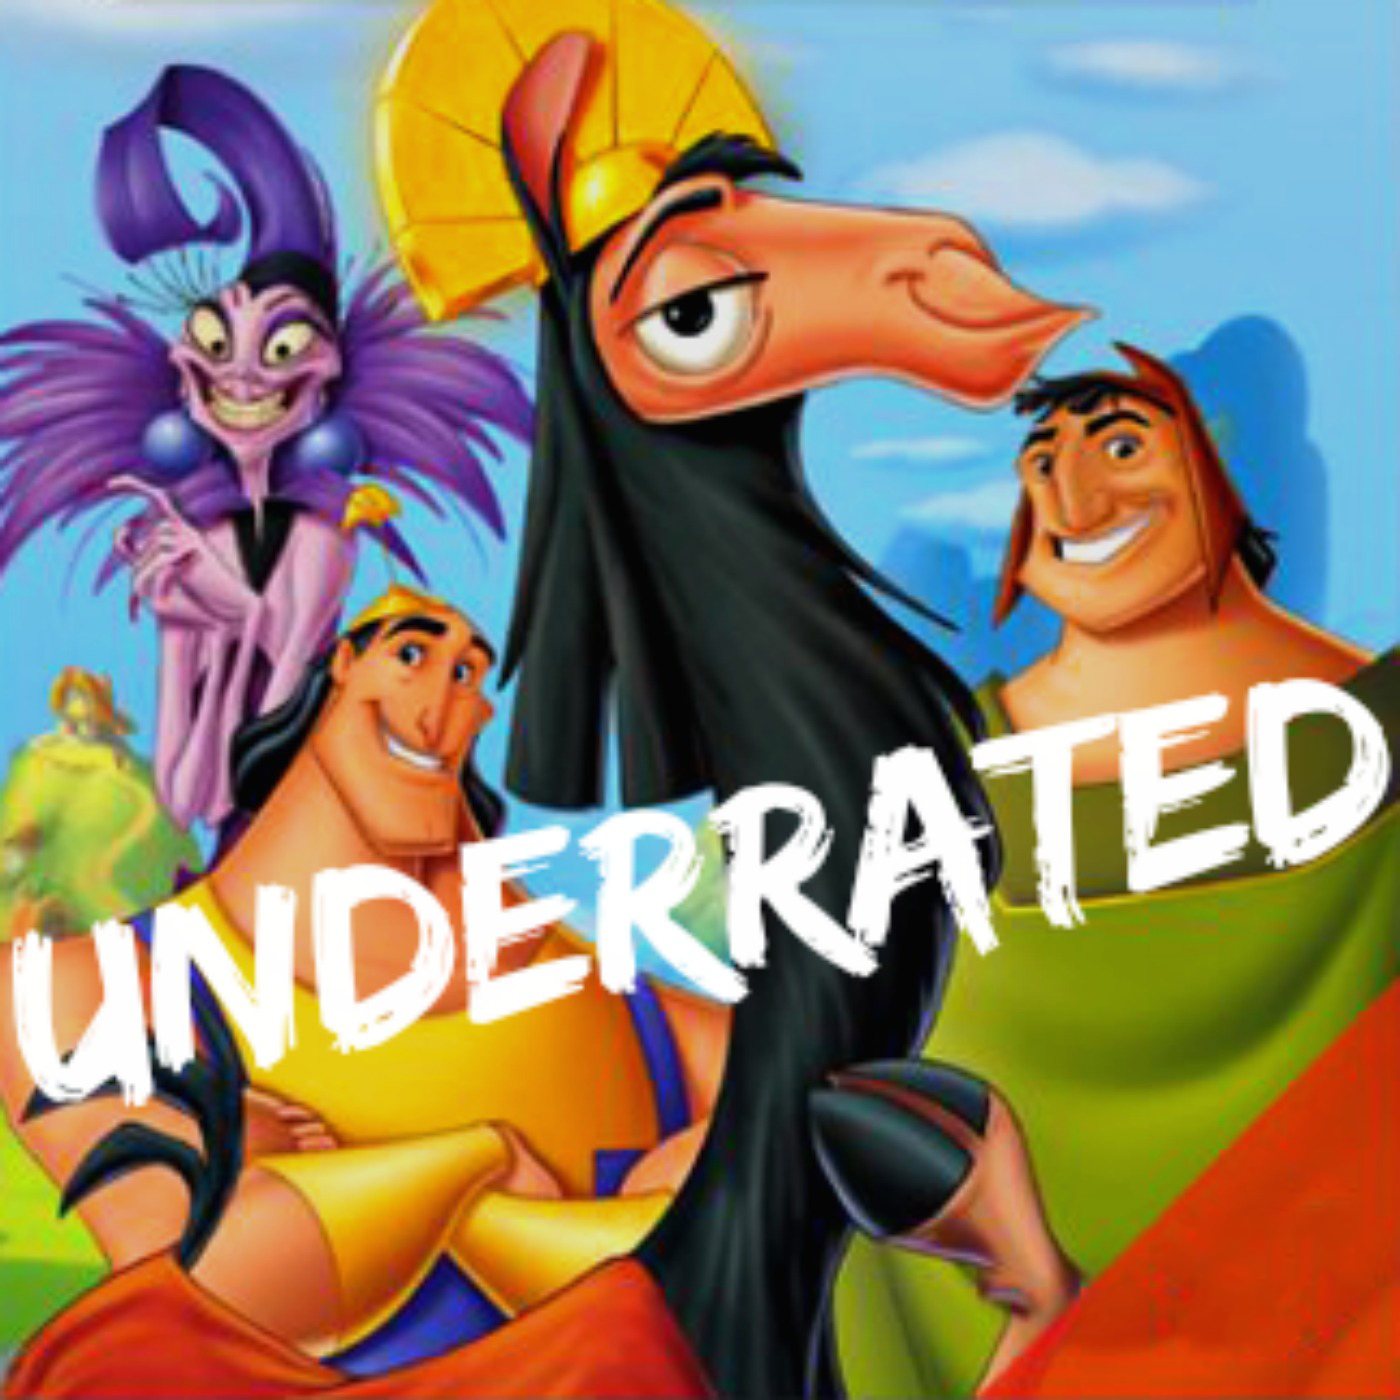 Episode 14: The Emperor’s New Groove Review